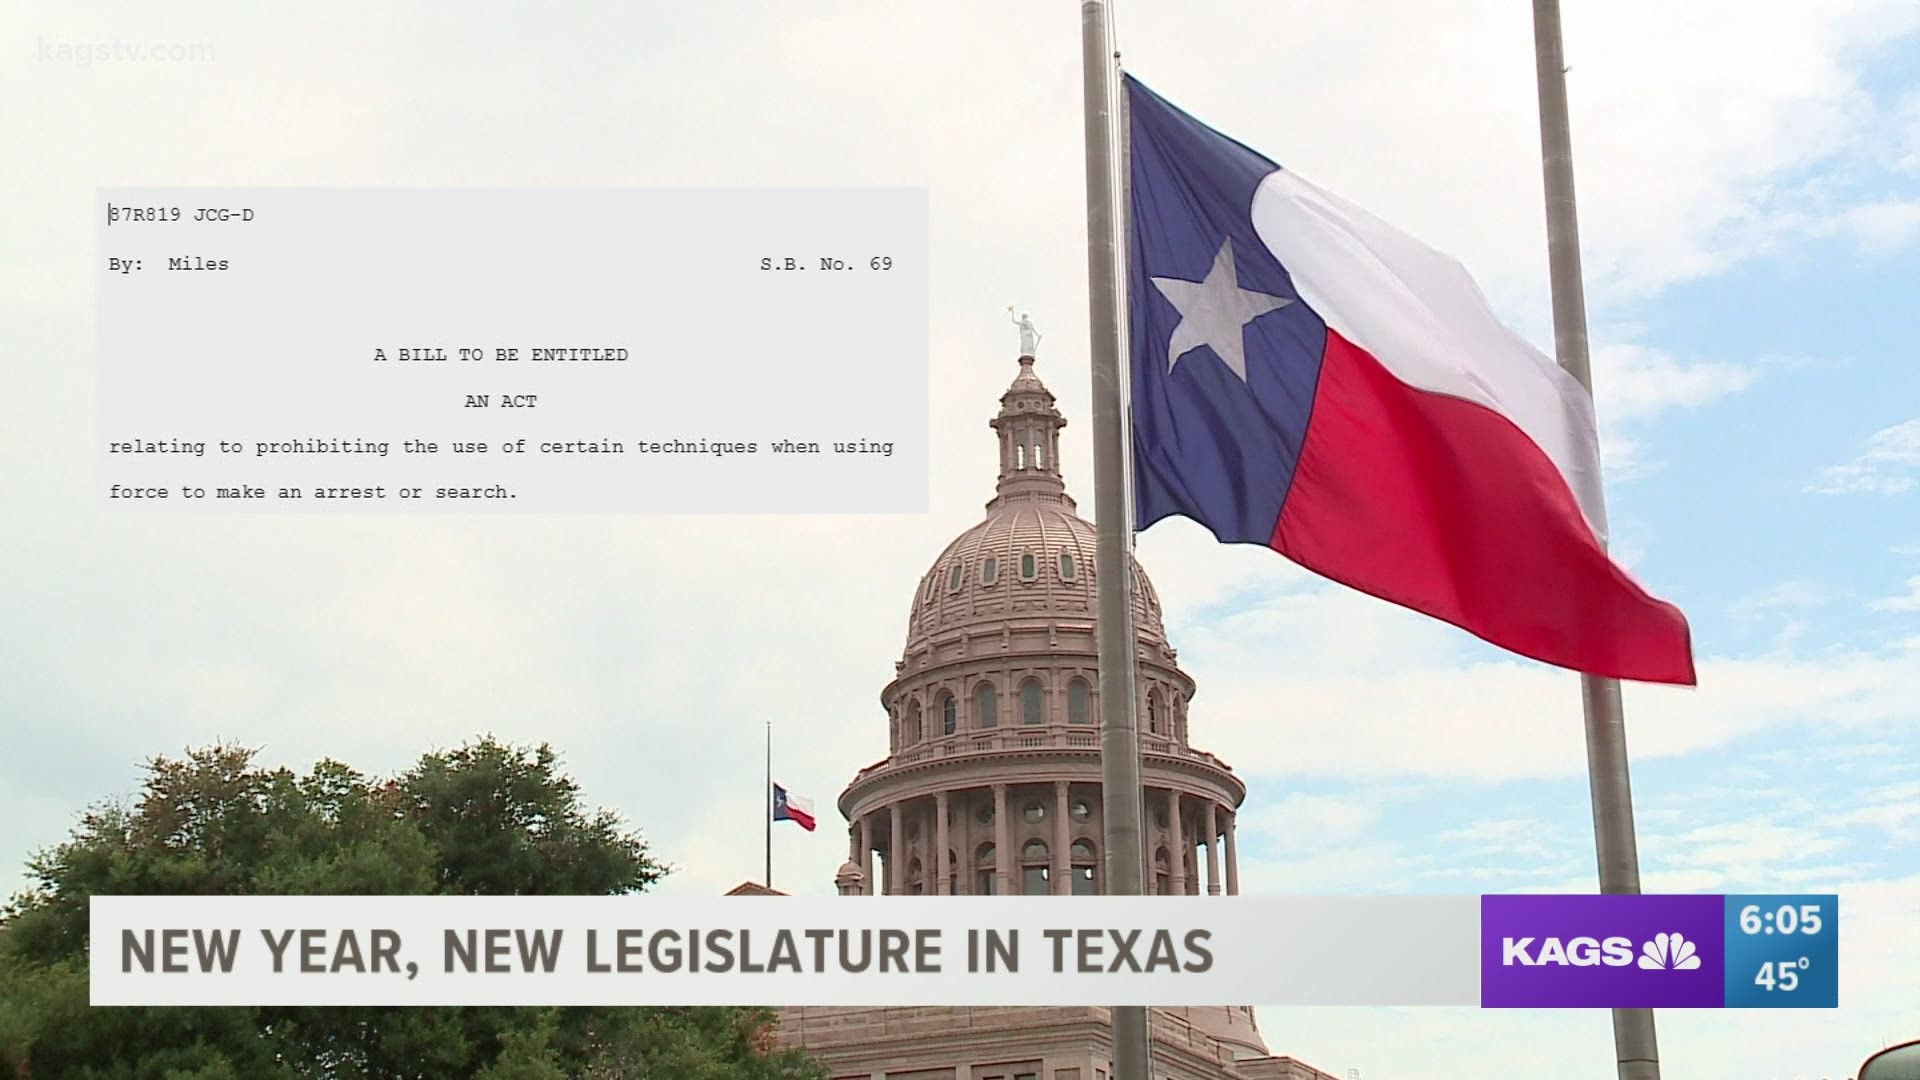 Texas’ 87th Legislative Session is scheduled for January 12, 2021.